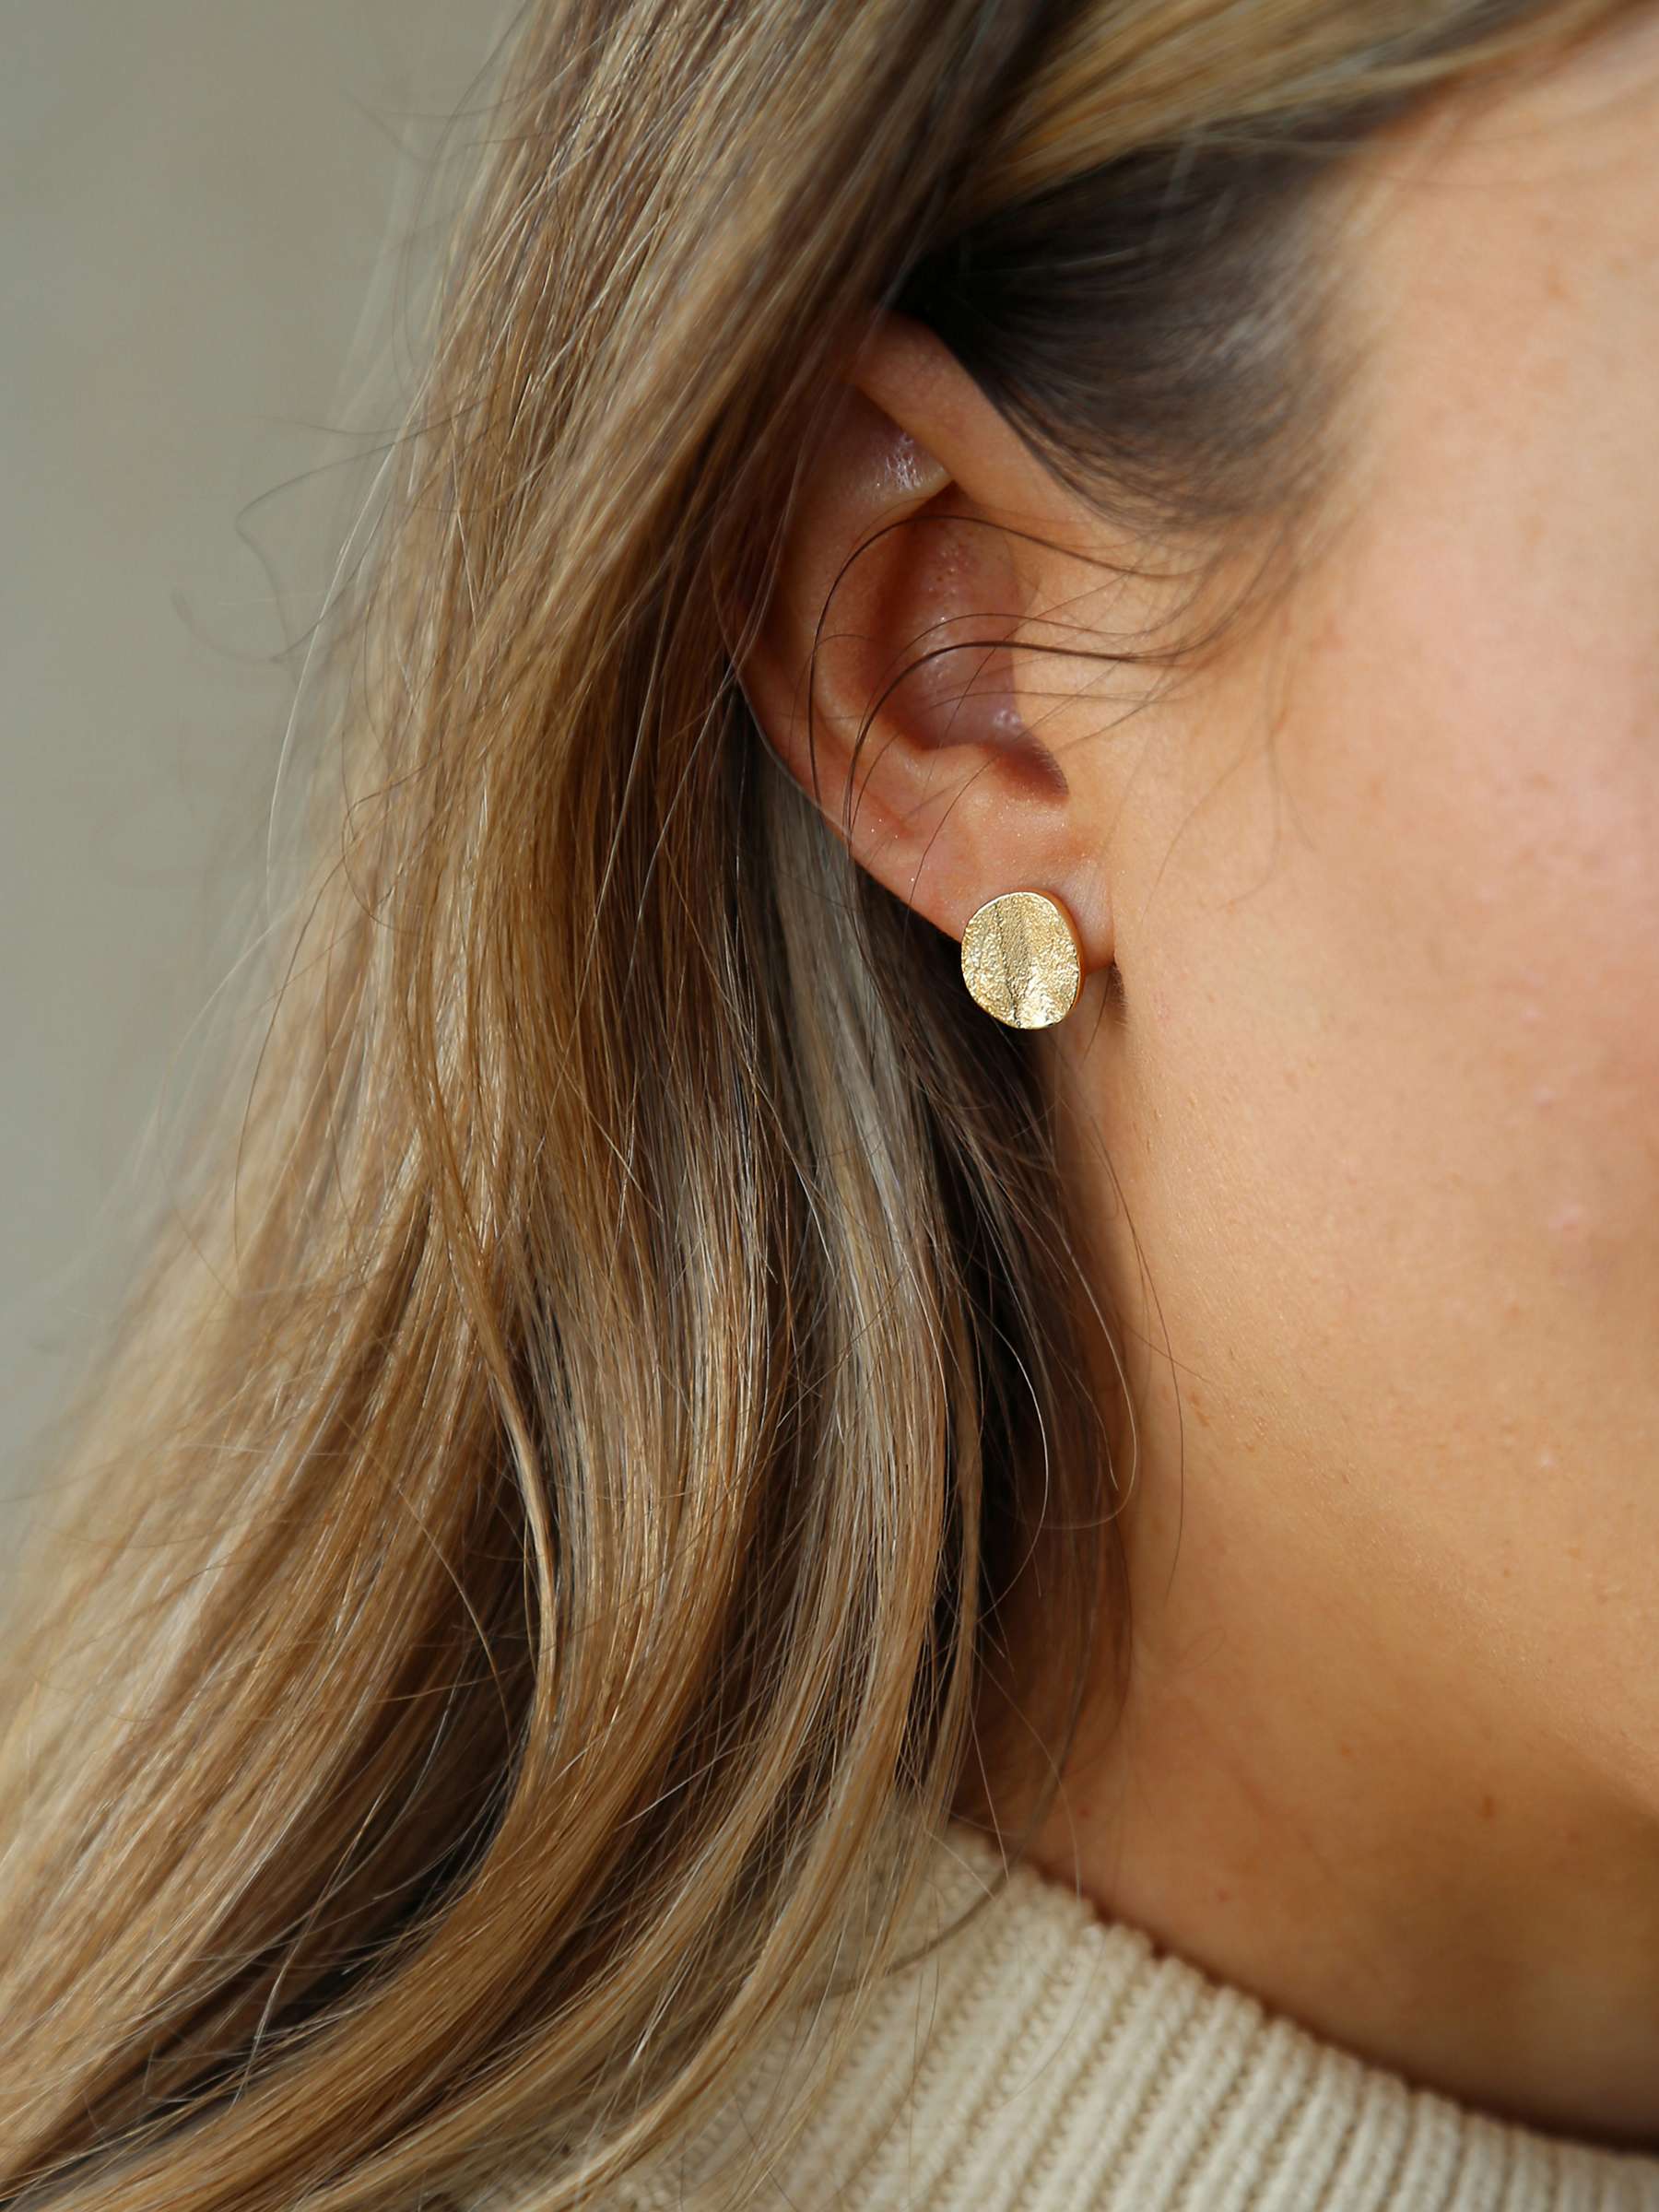 Buy Tutti & Co Frost Textured Stud Earrings Online at johnlewis.com